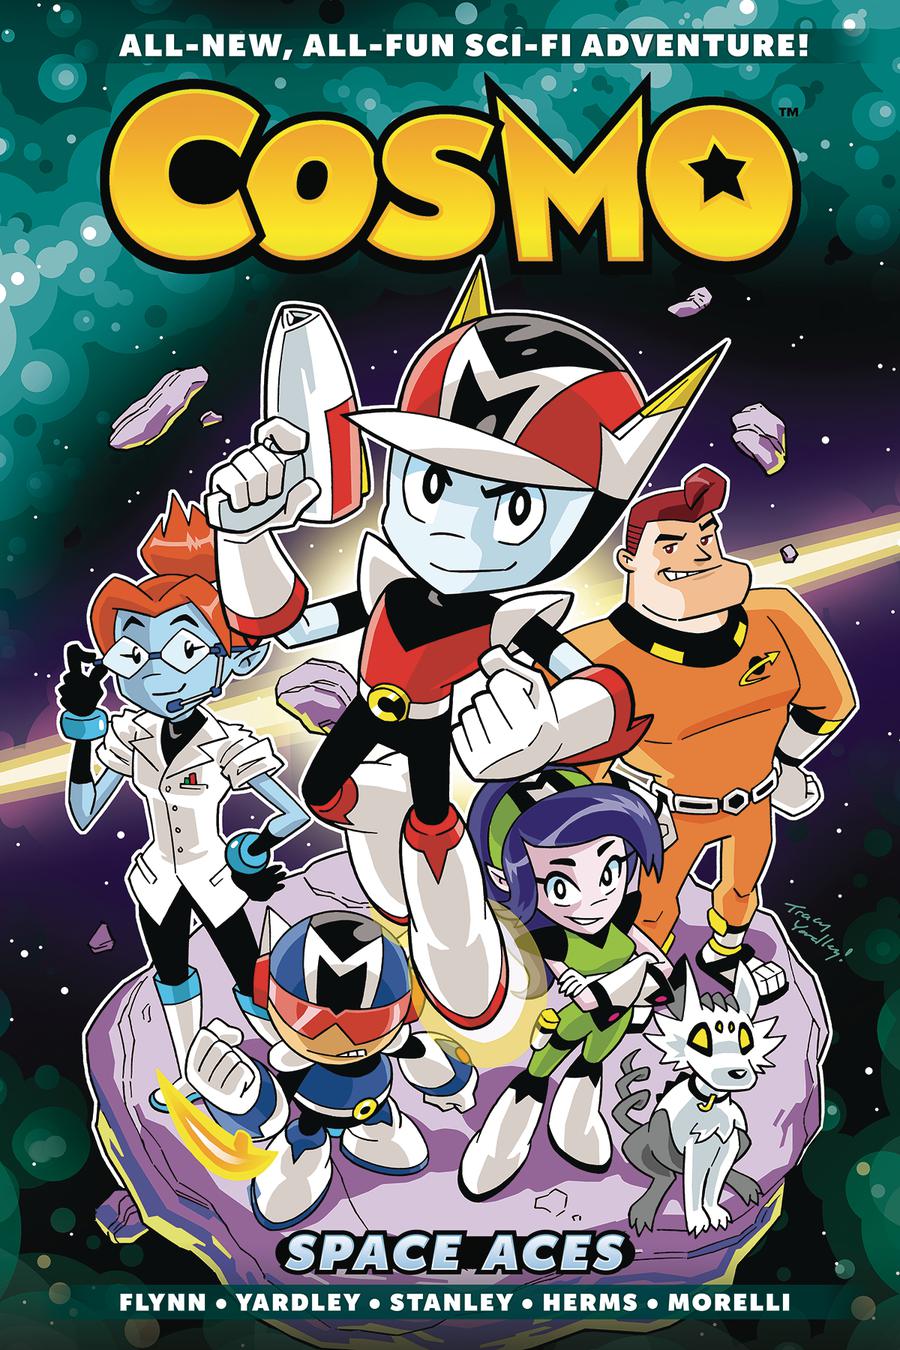 Cosmo Vol 1 Space Aces TP